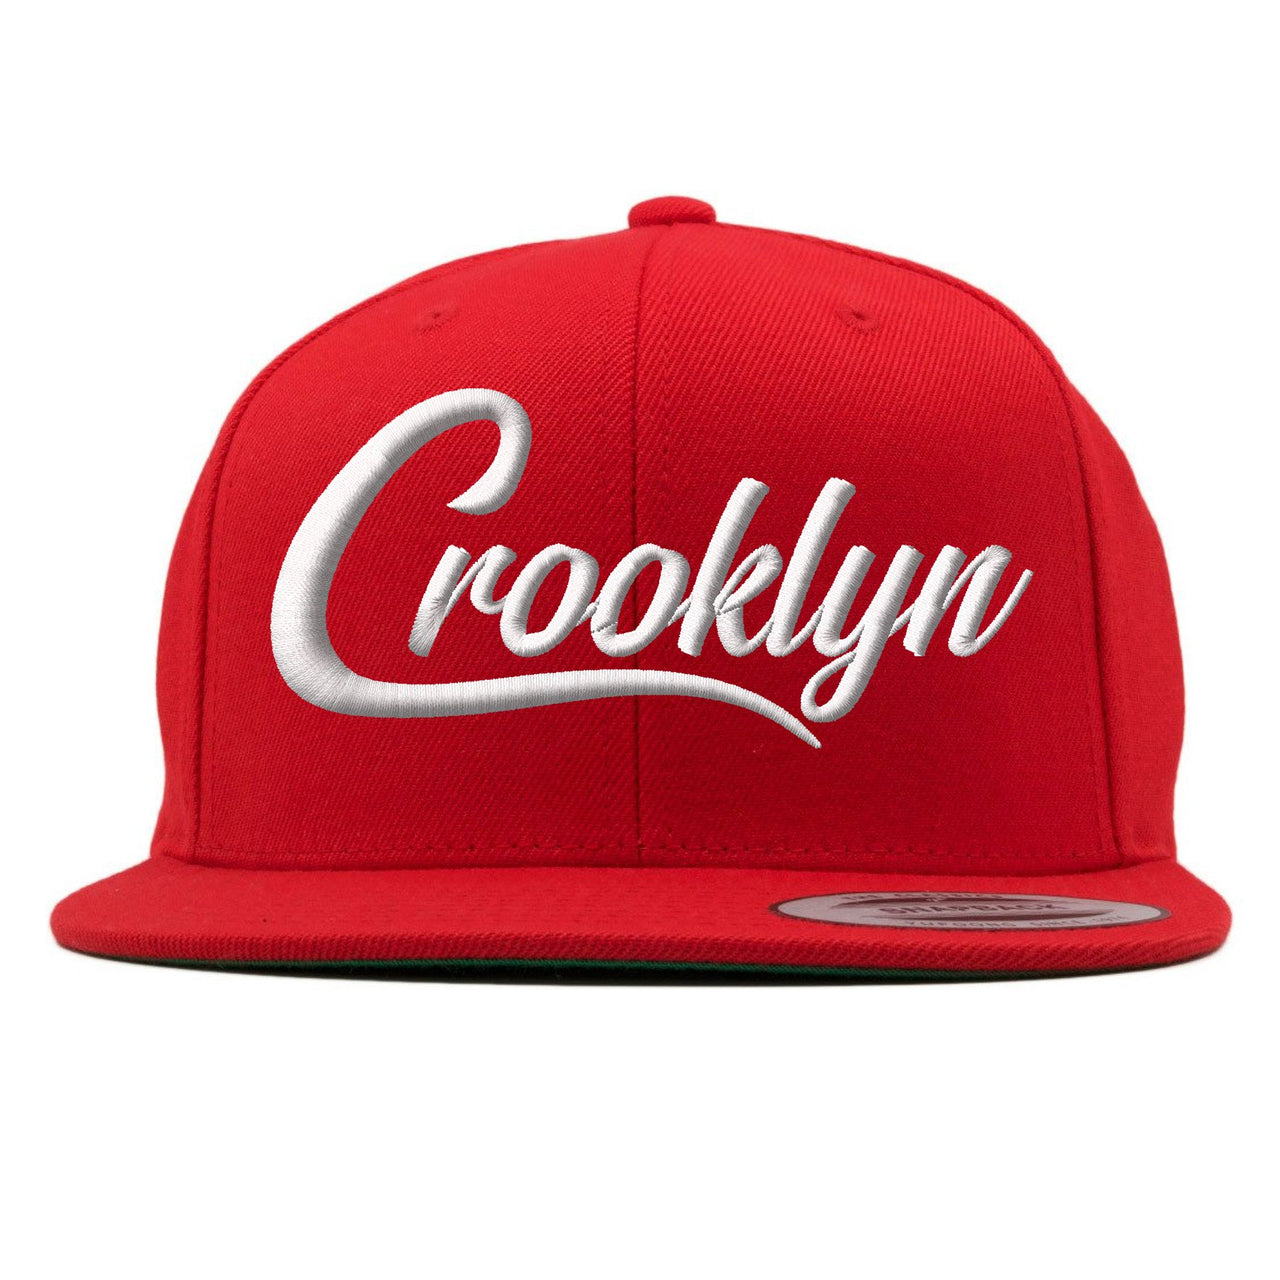 White University Red Pluses Snapback | Crooklyn, Red